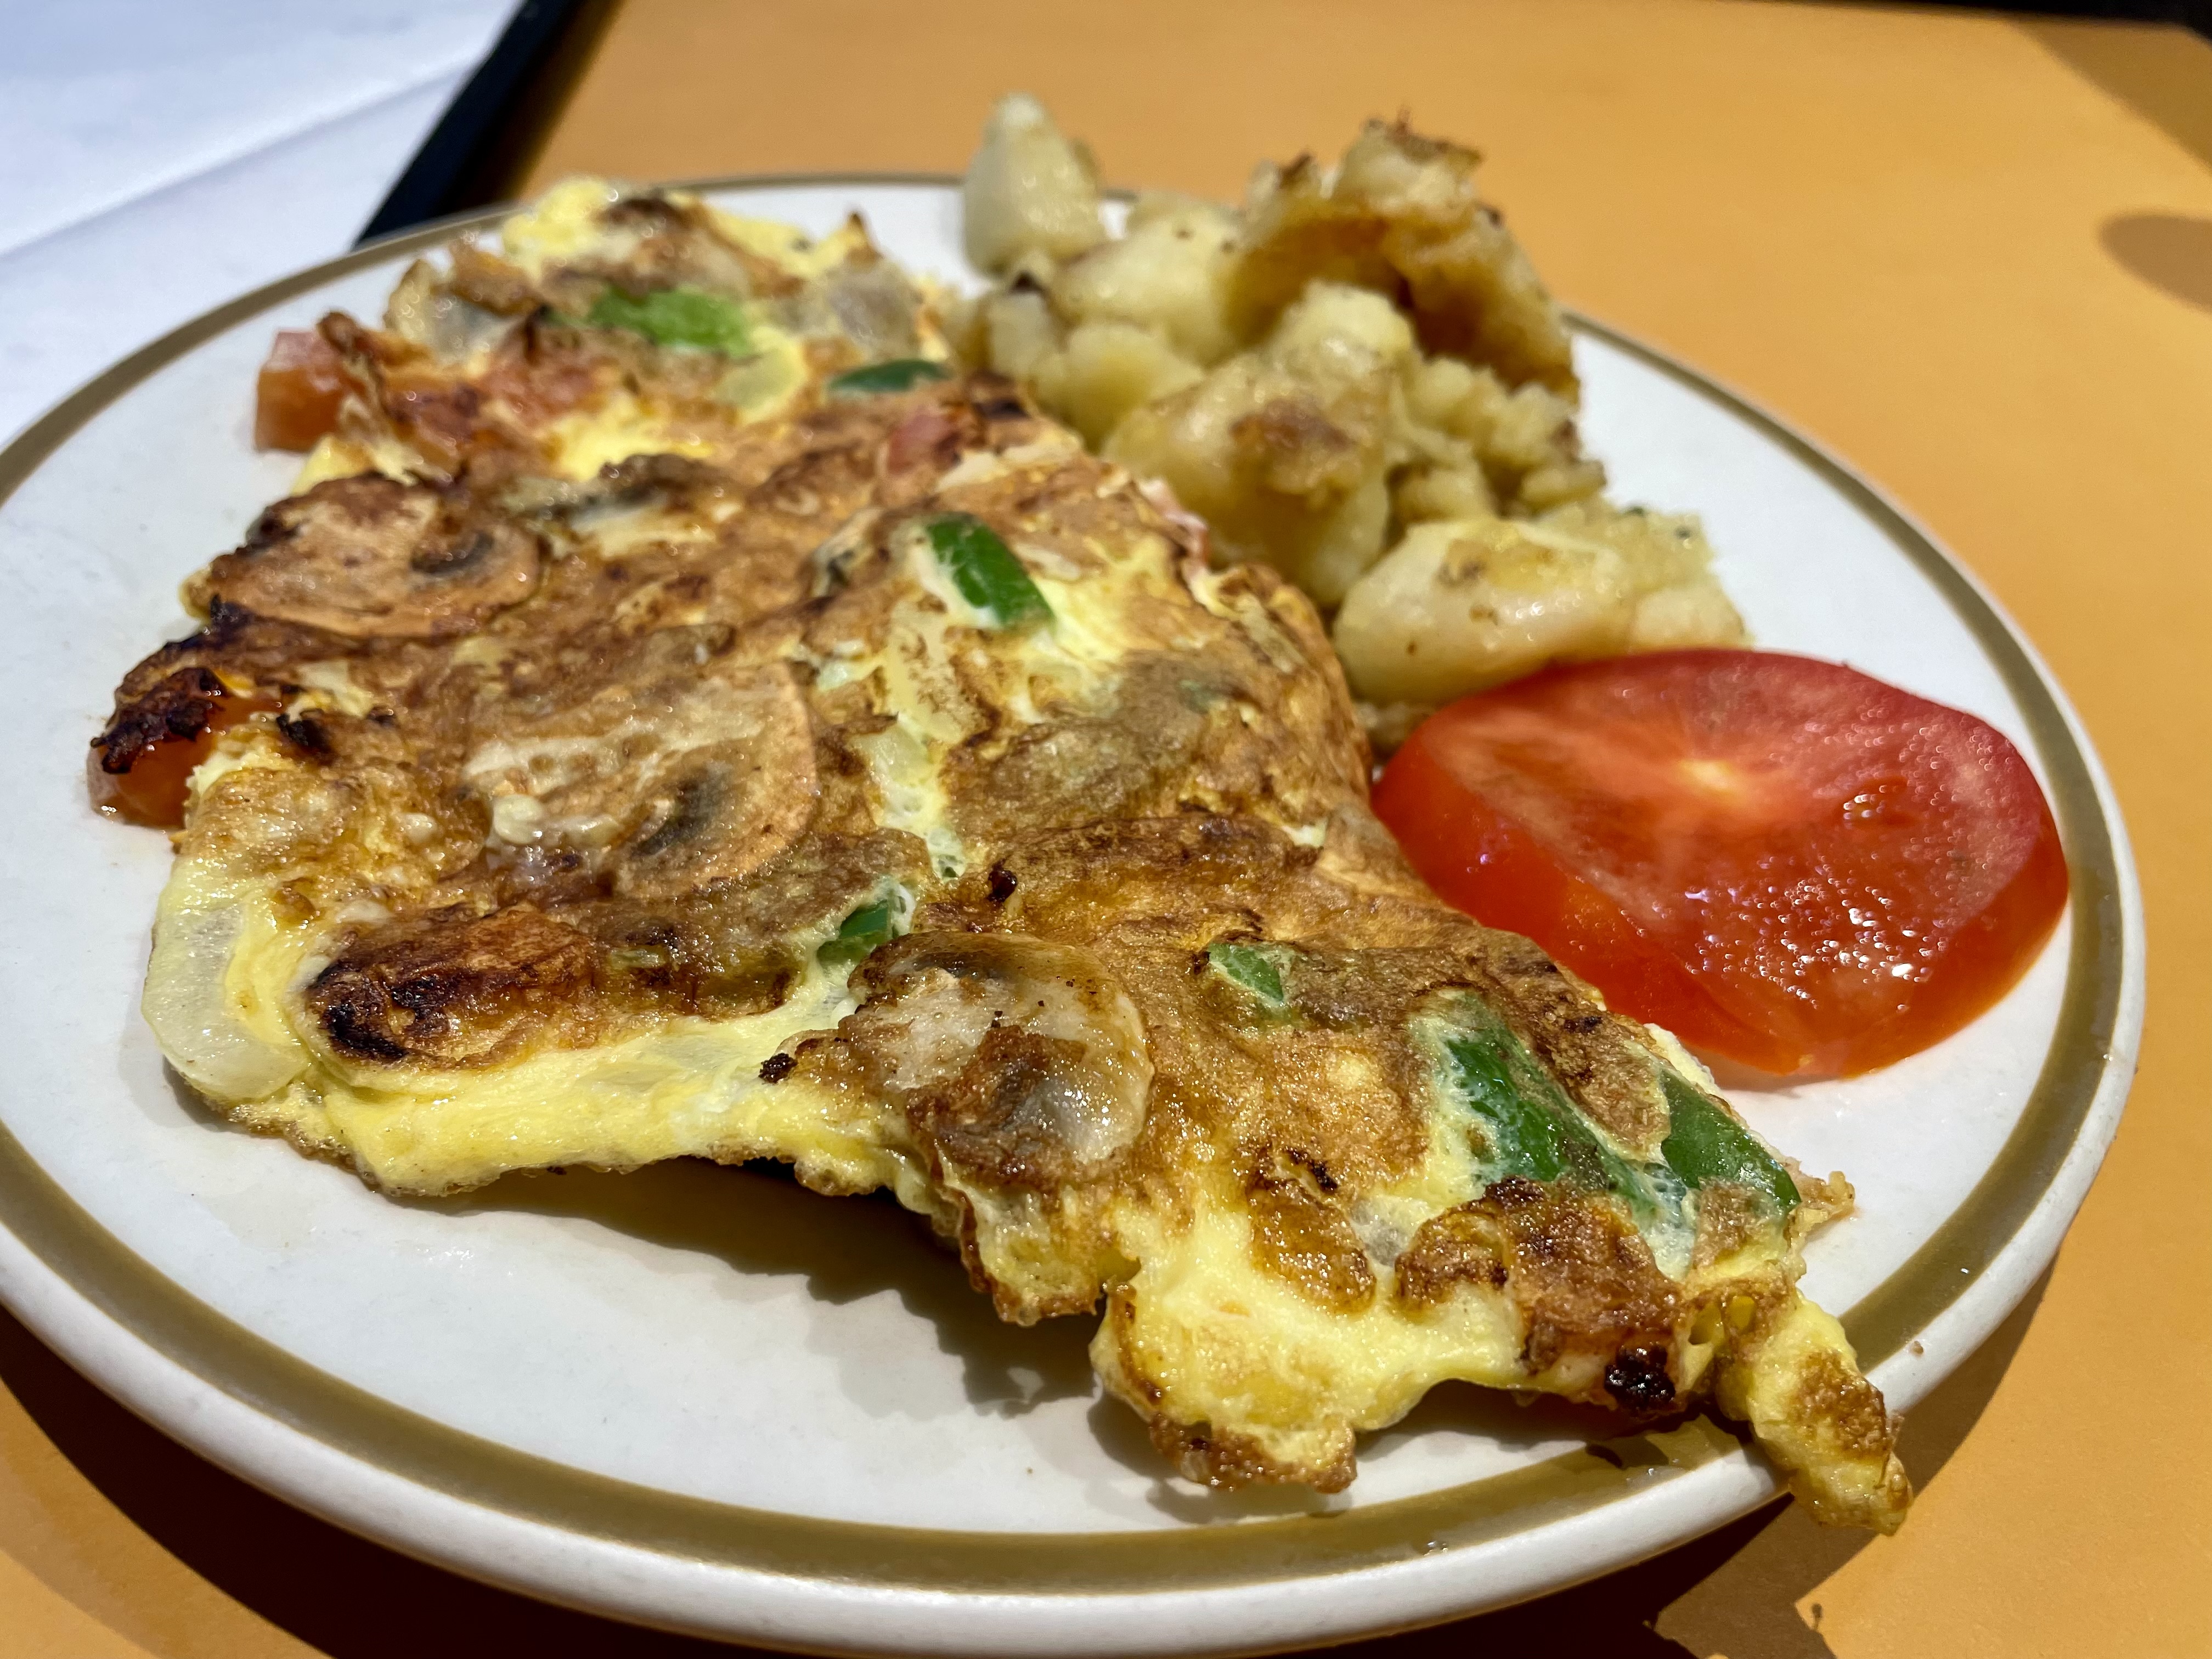 The no-frills vegetarian omlette reminded me of my grandmother's omlettes